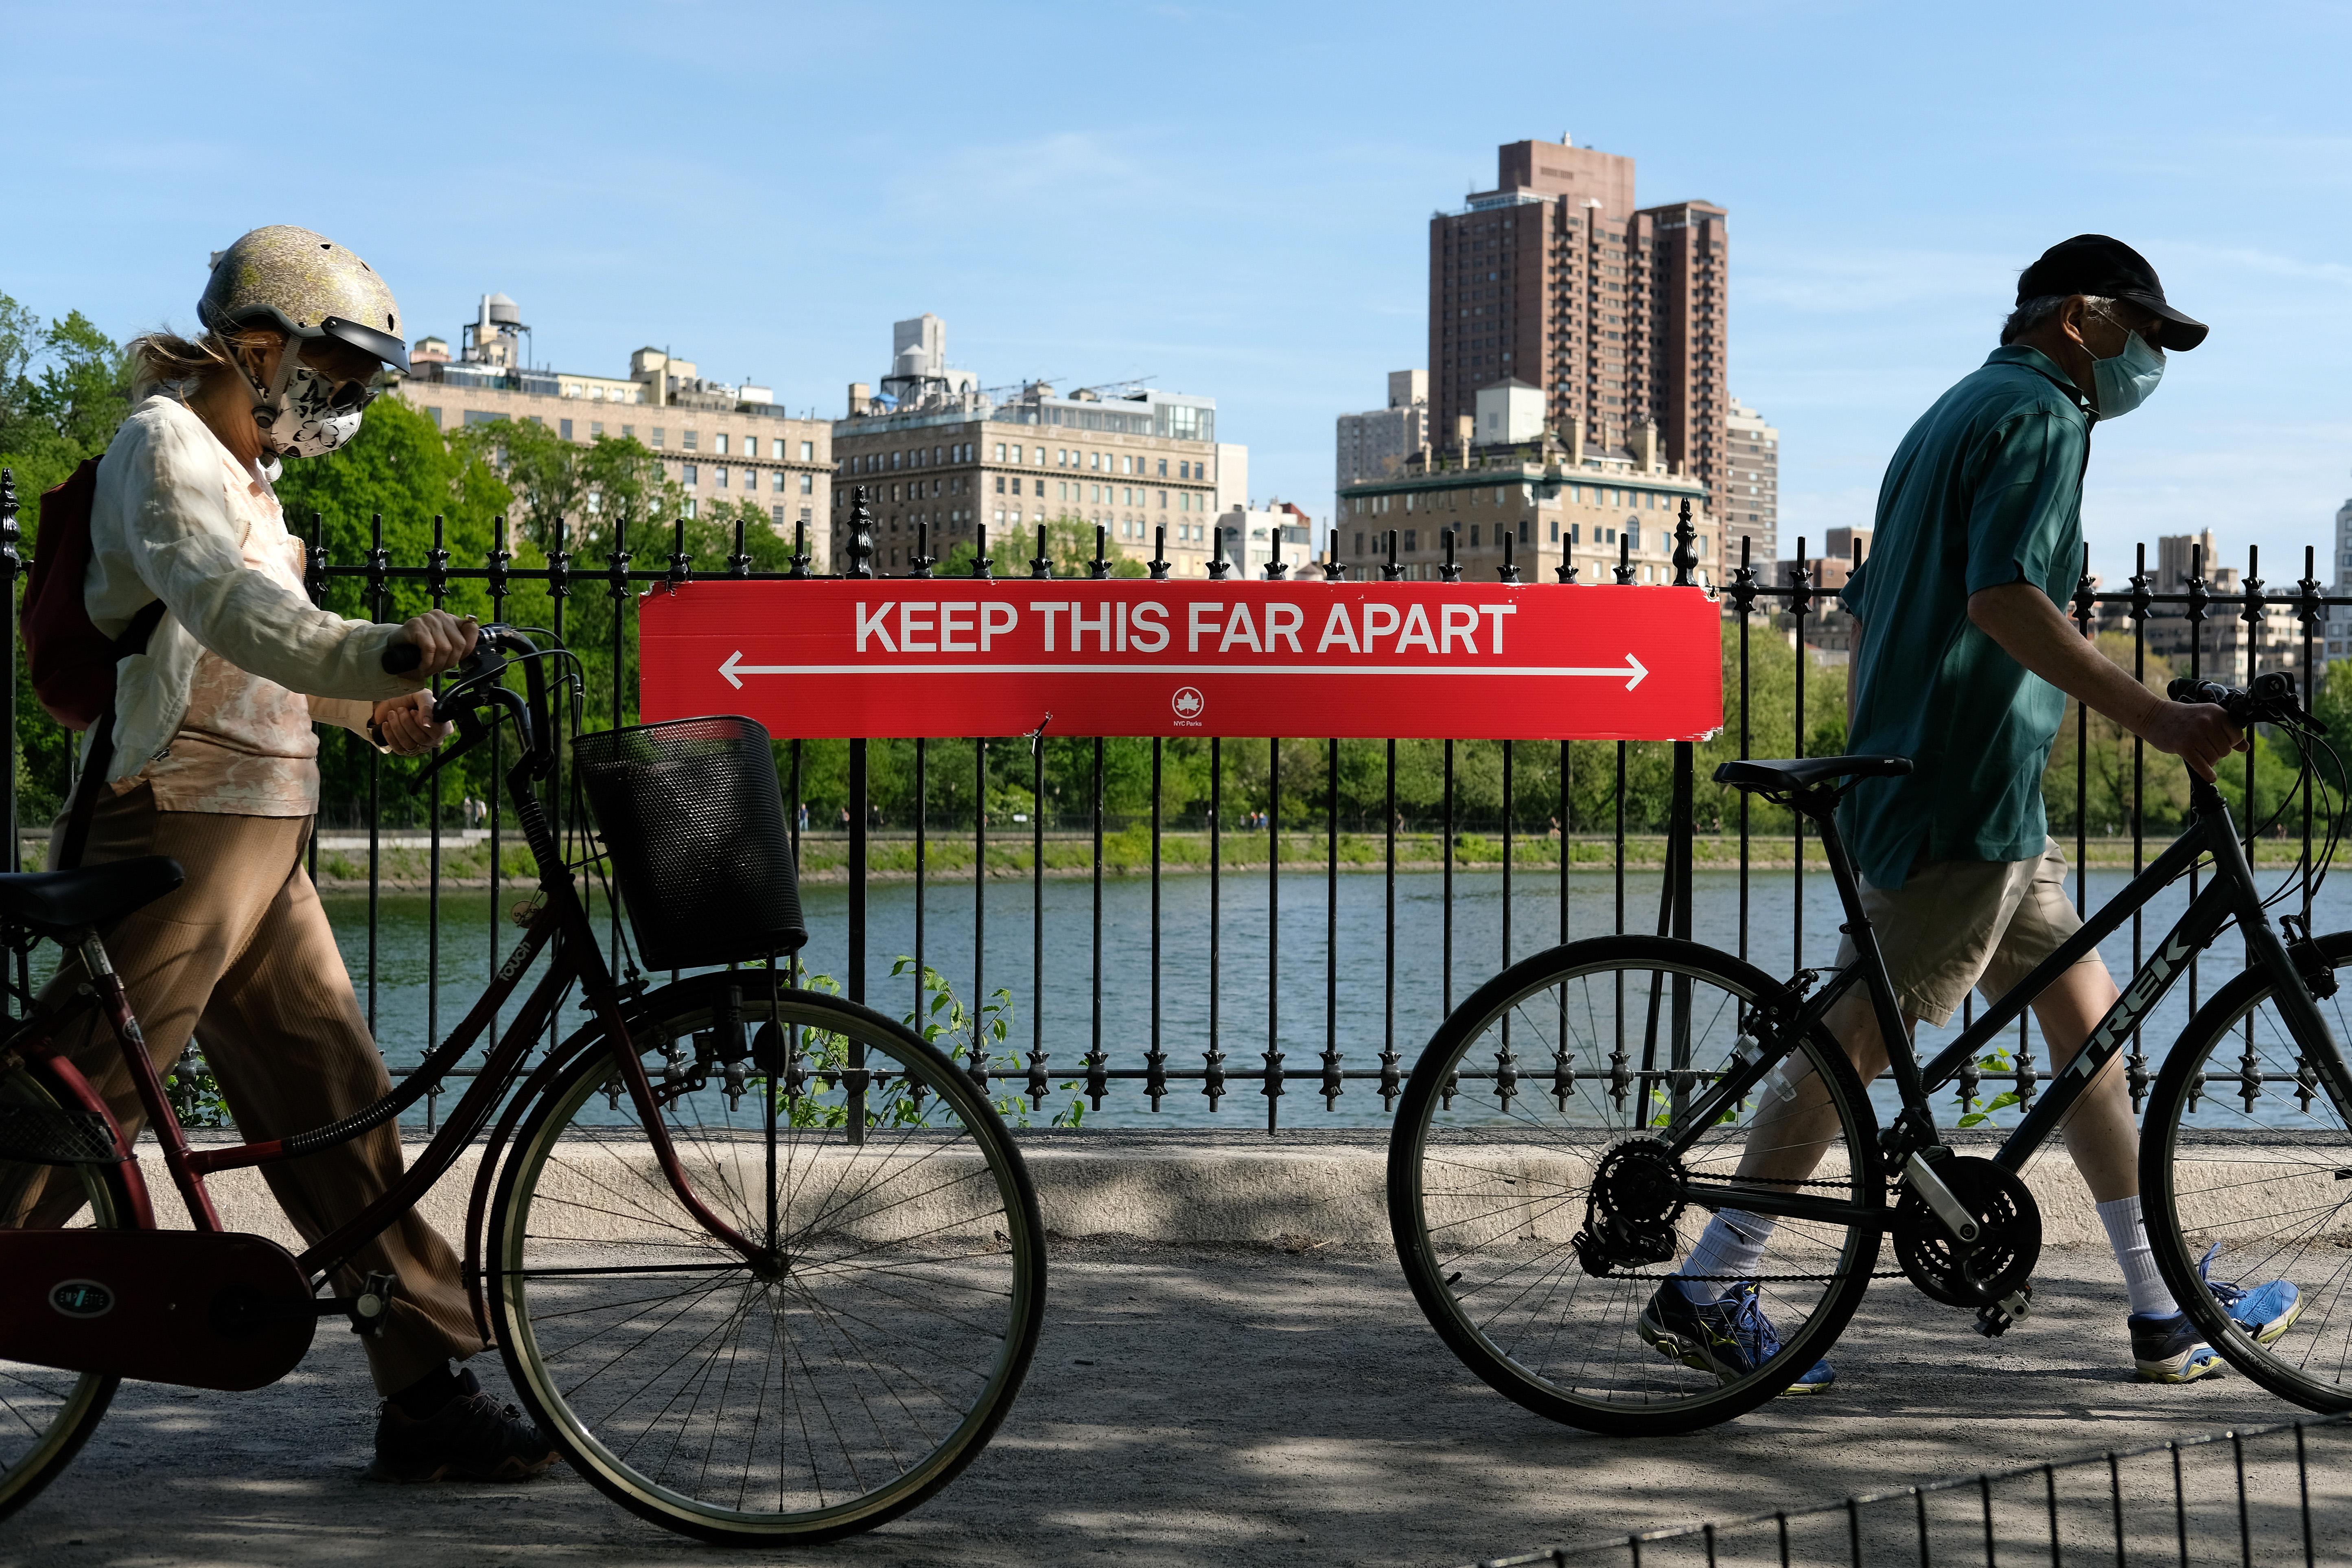 People wearing protective masks walk their bicycles past a social distancing sign reading "KEEP THIS FAR APART" in Central Park.